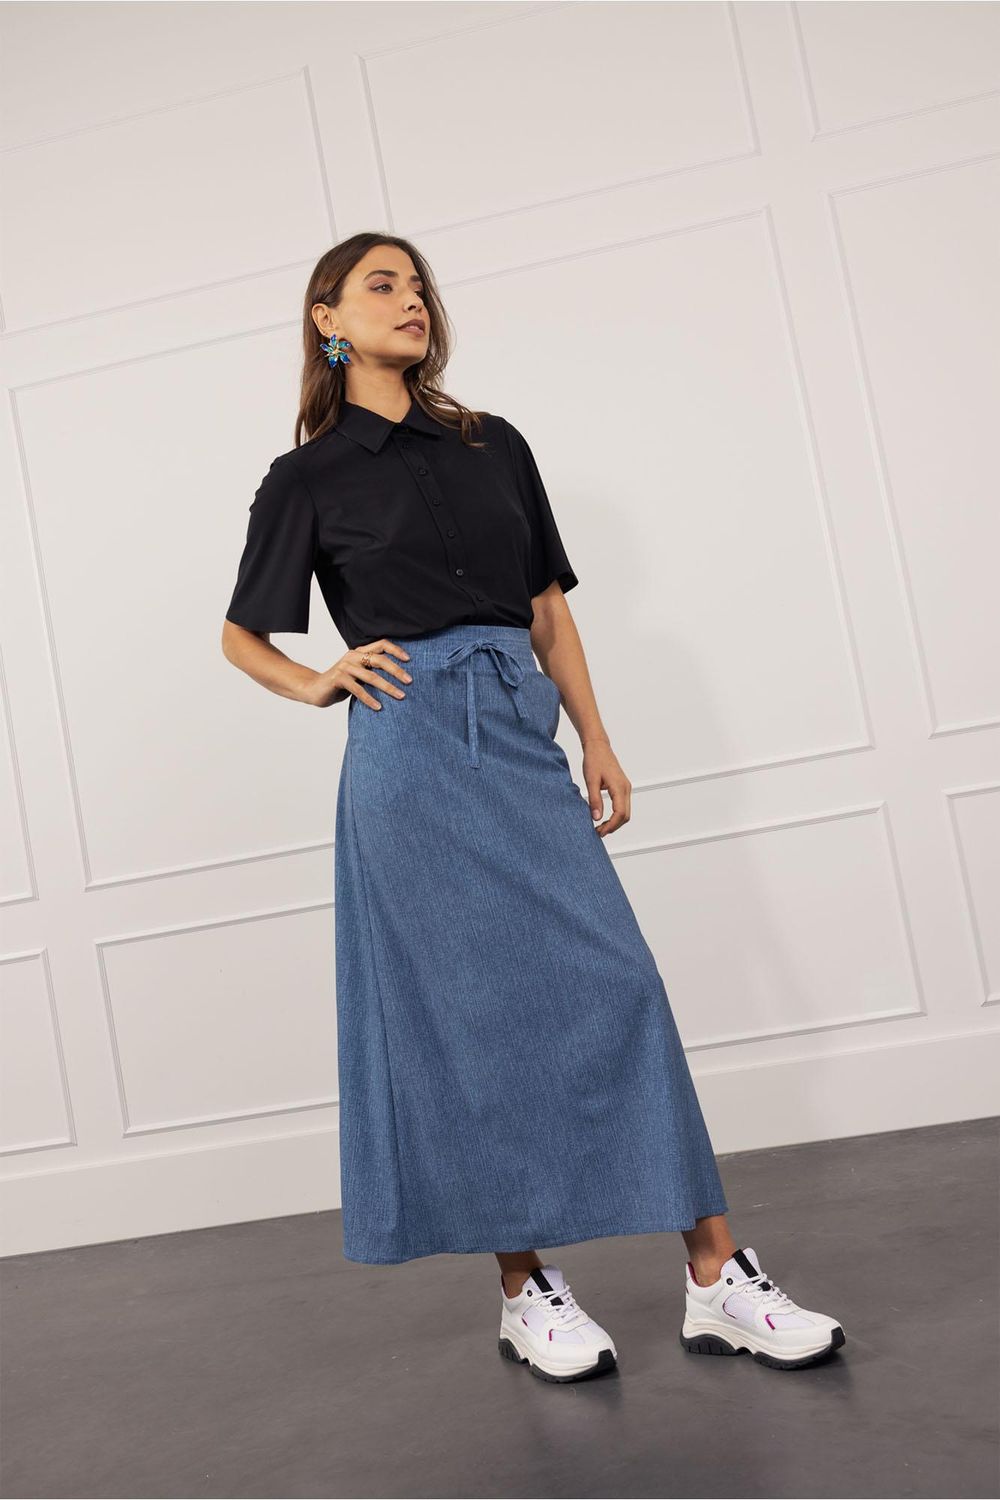 Studio Anneloes Chloe jeans maxi skirt, mid jeans, Size: M